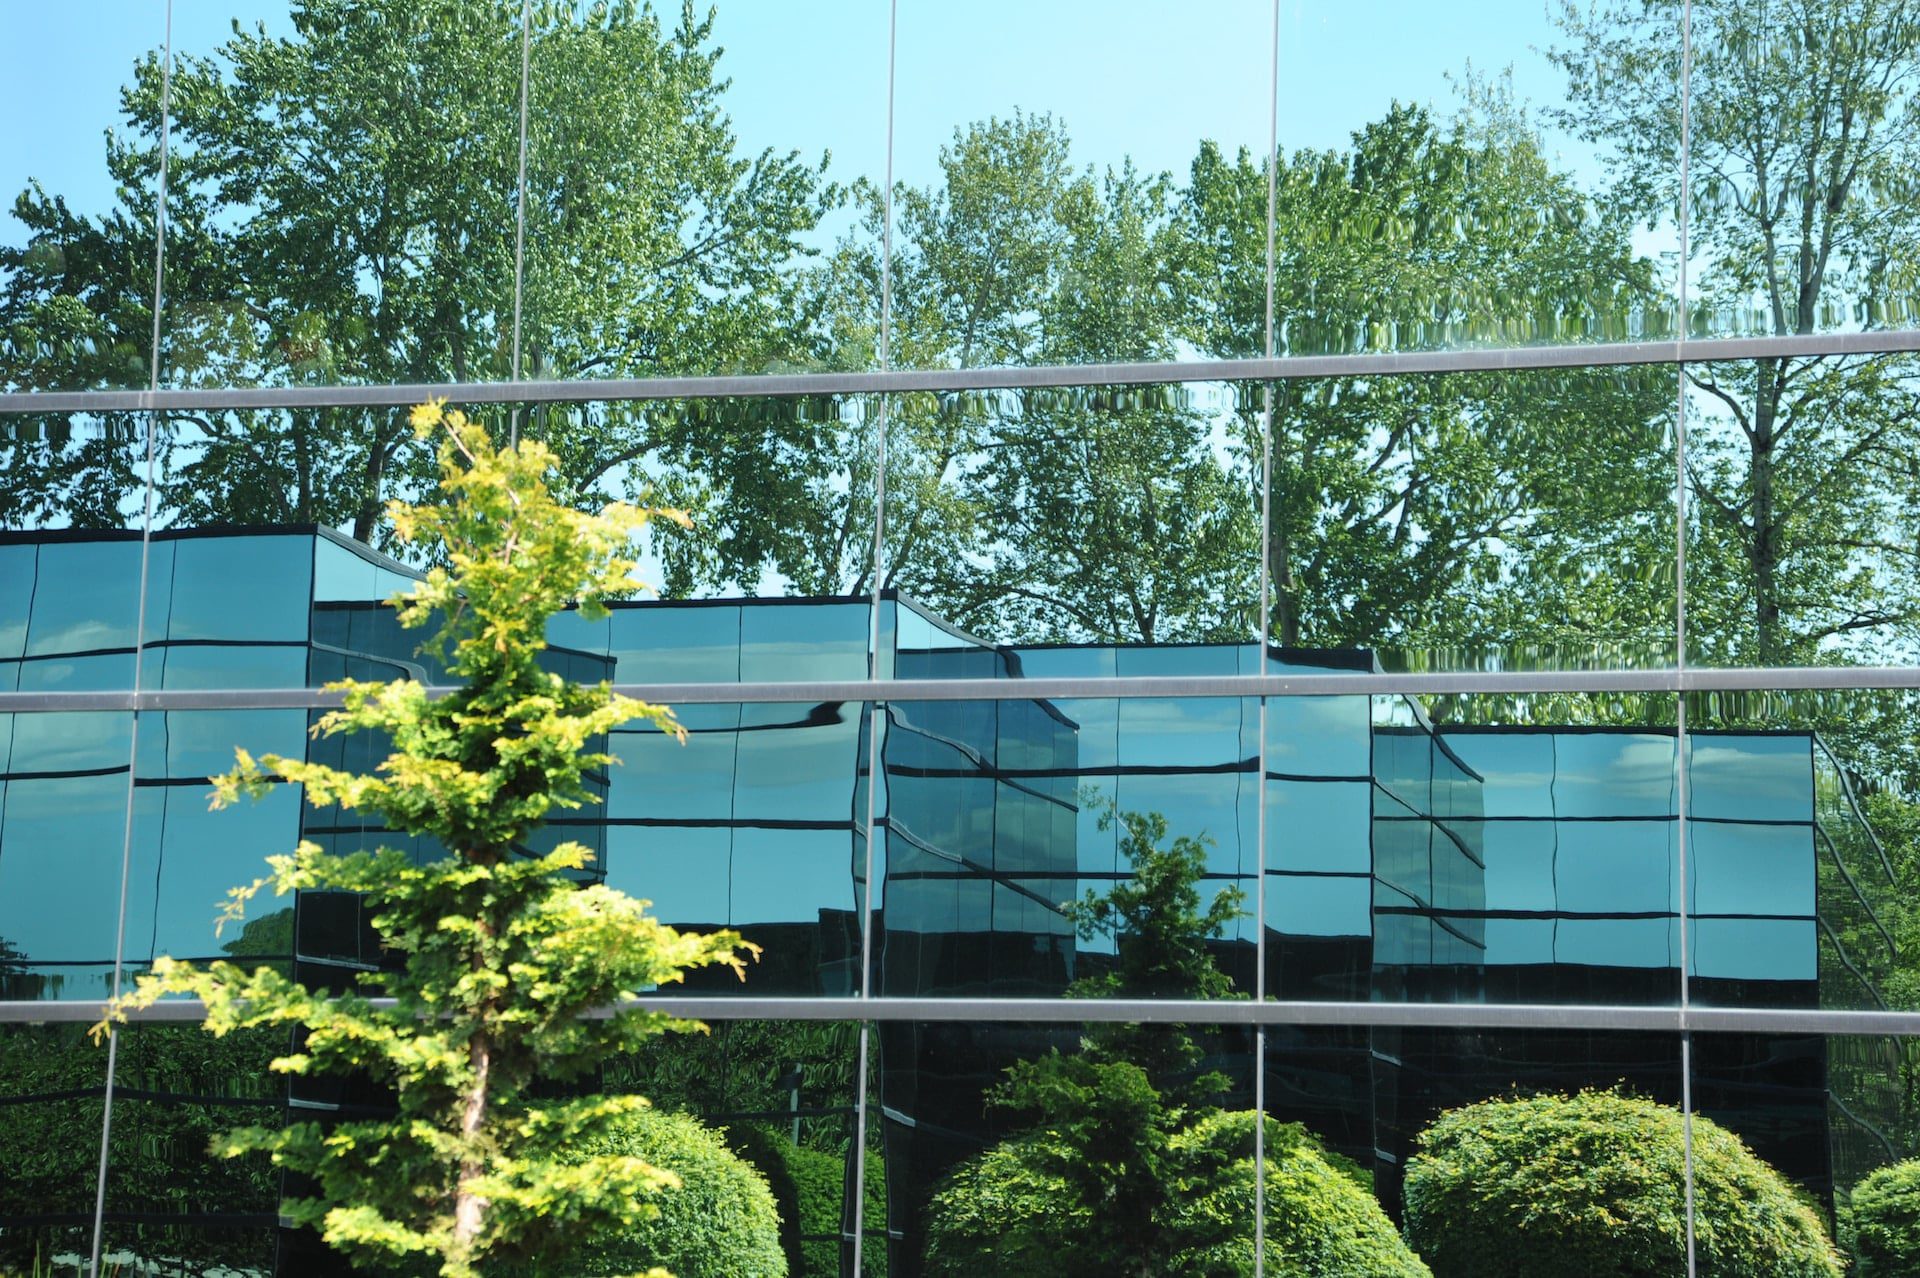 Corporate building reflection with trees in Bellevue, Washington.